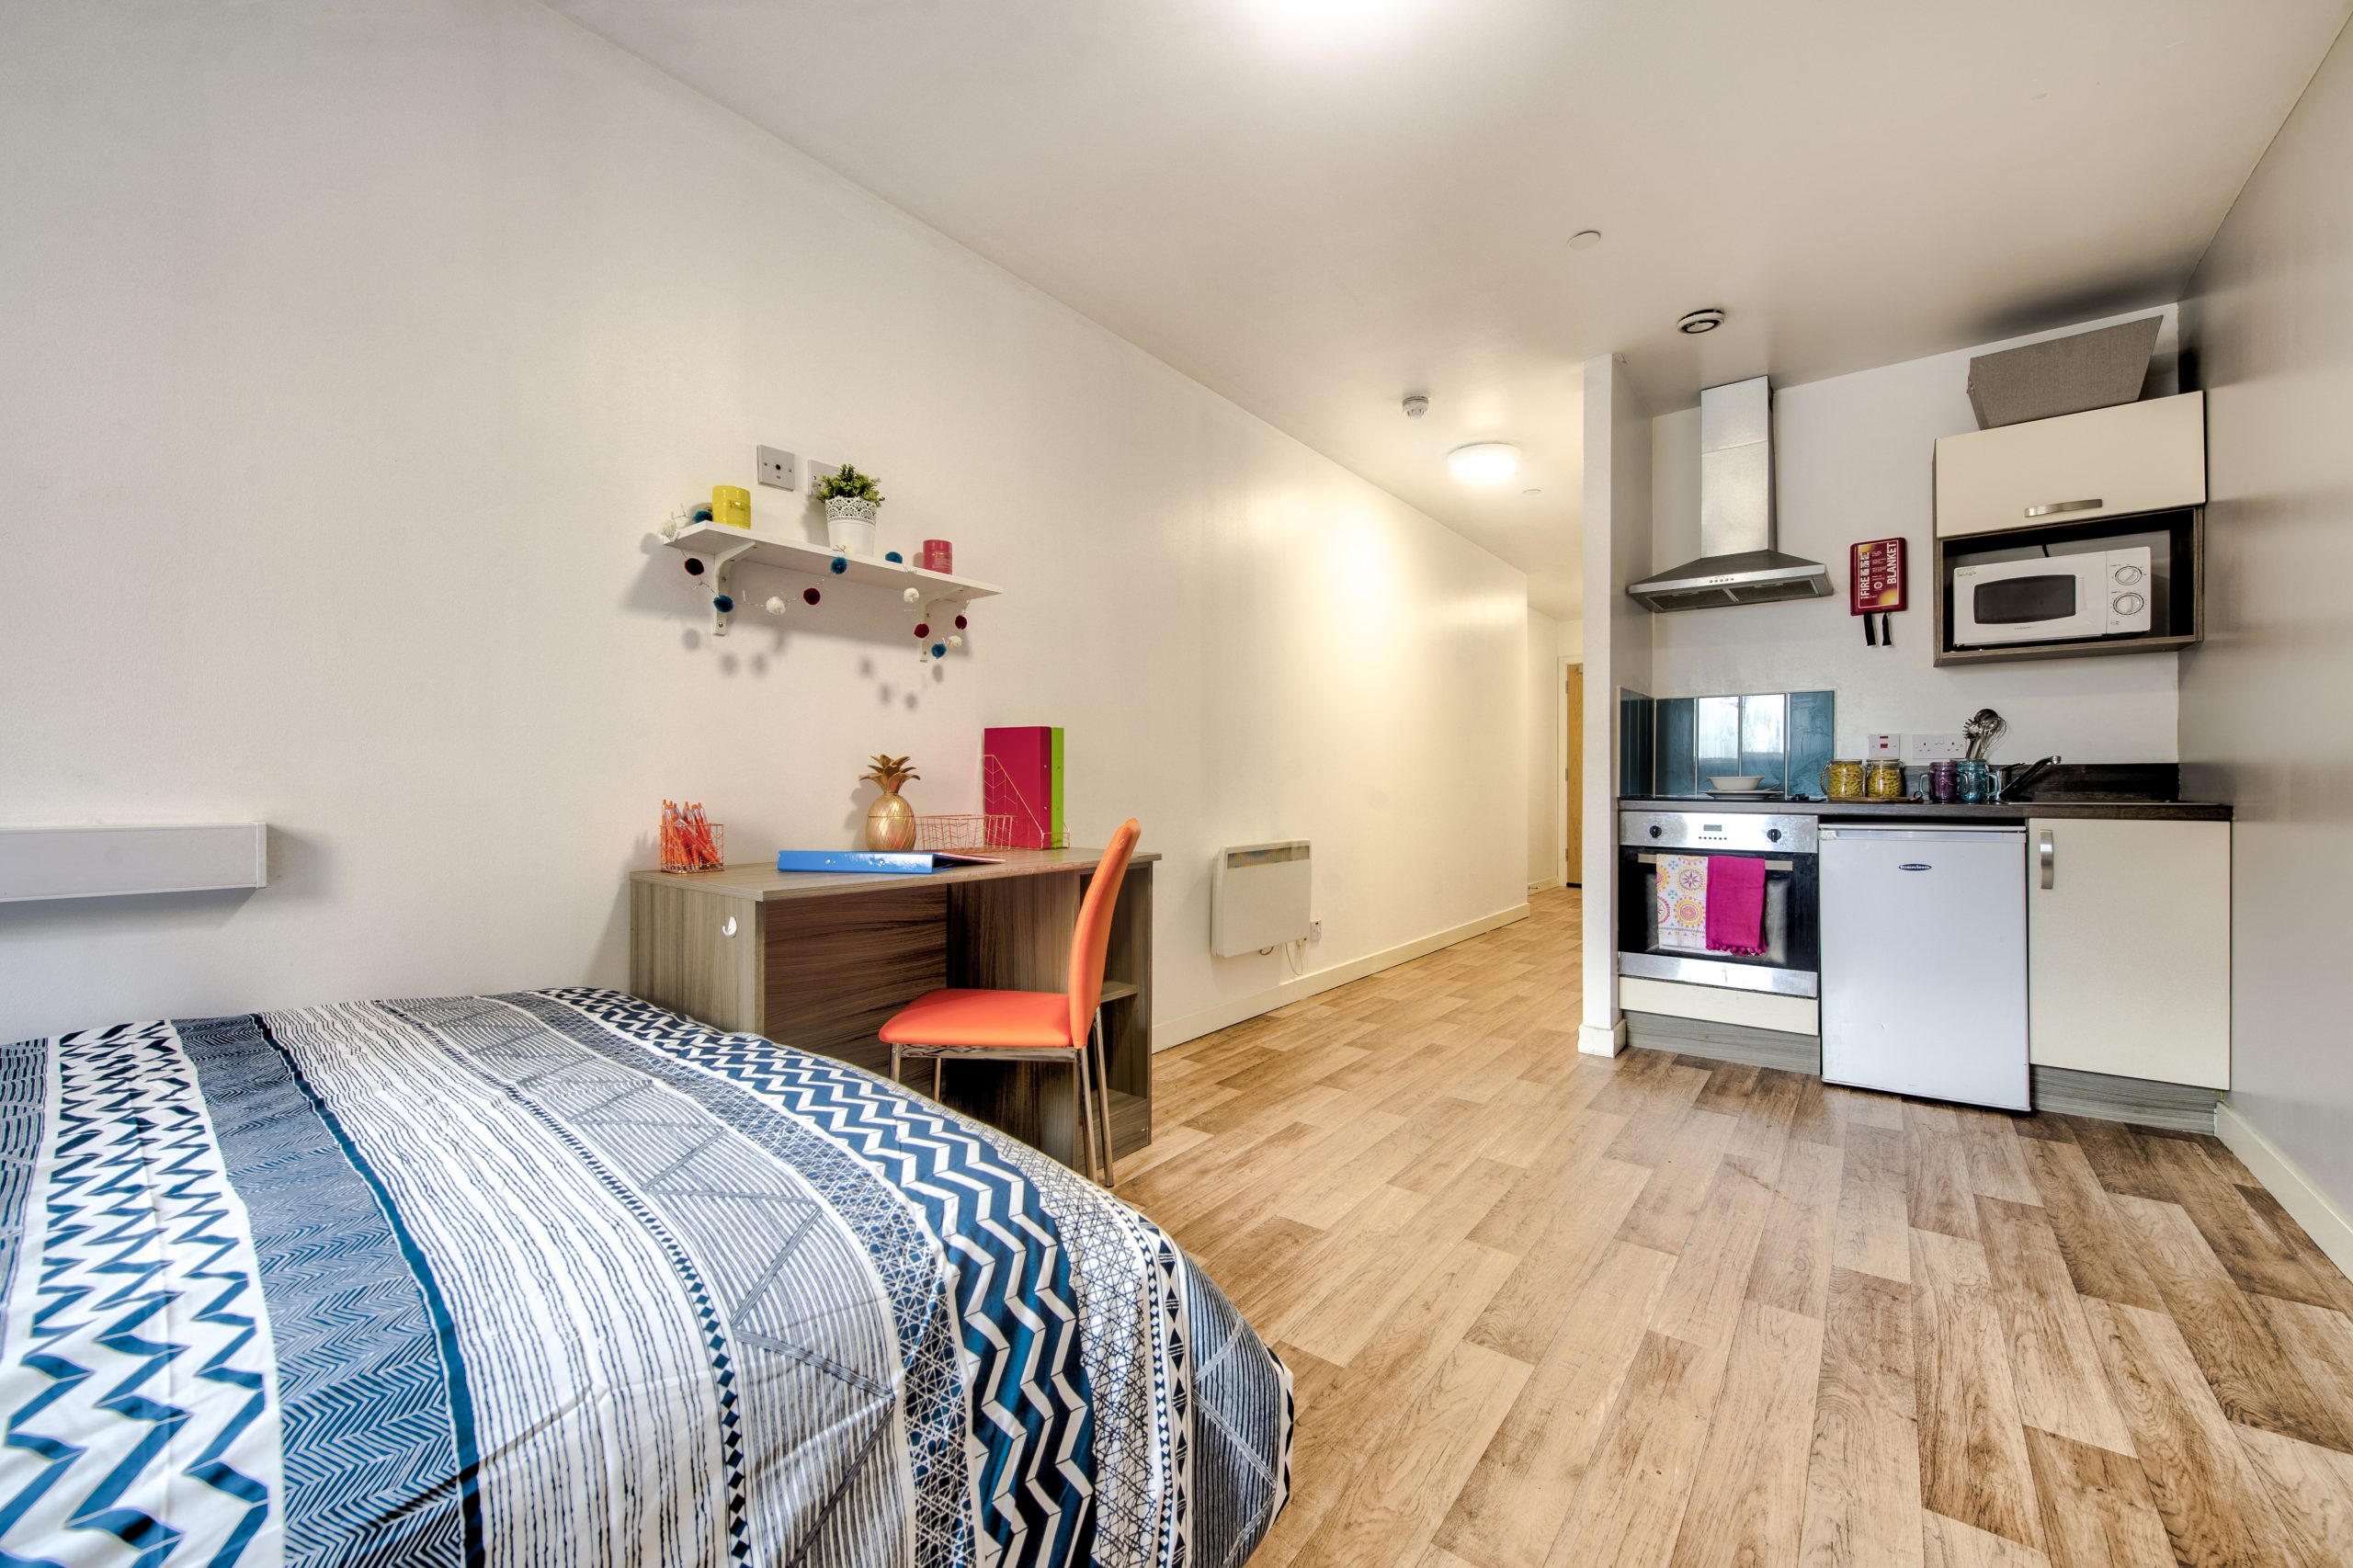 kitchen and double bed in studio apartment